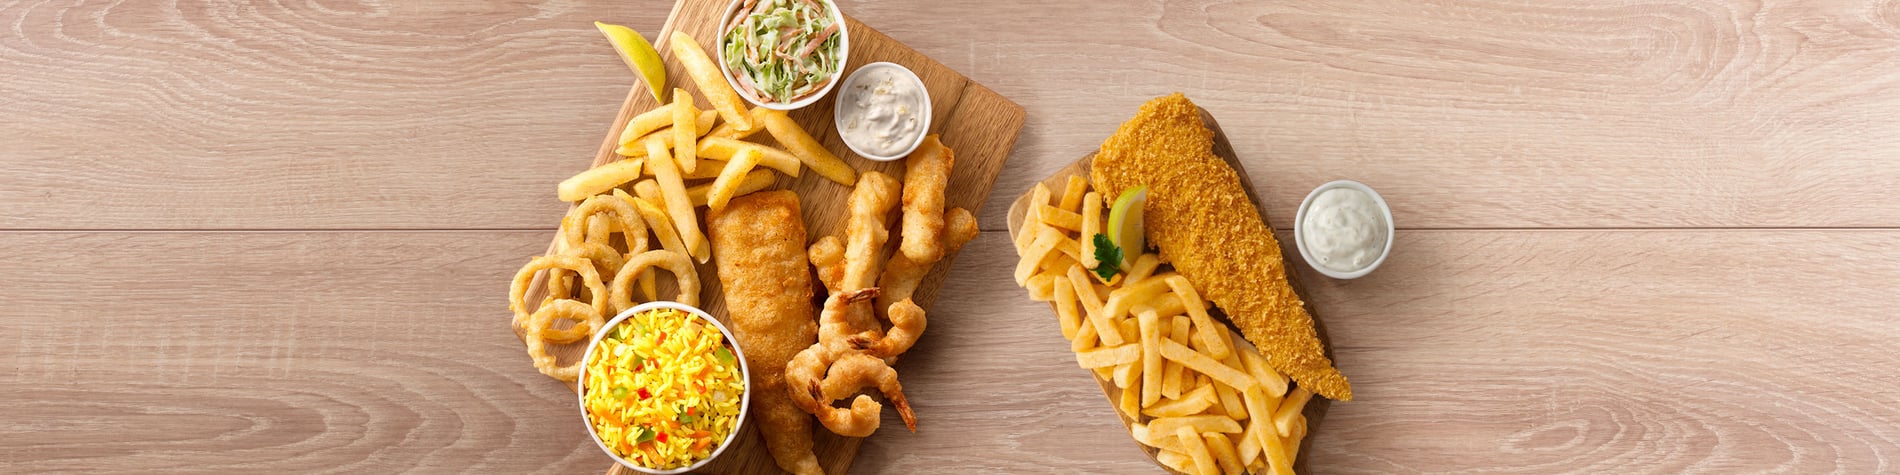 Seafood meals from Fishaways TotalEnergies Pimville Express including a Crunchy Fish and Chips meal and a seafood Platter for One with hake, calamari, prawns, chips, onion rings, and coleslaw.